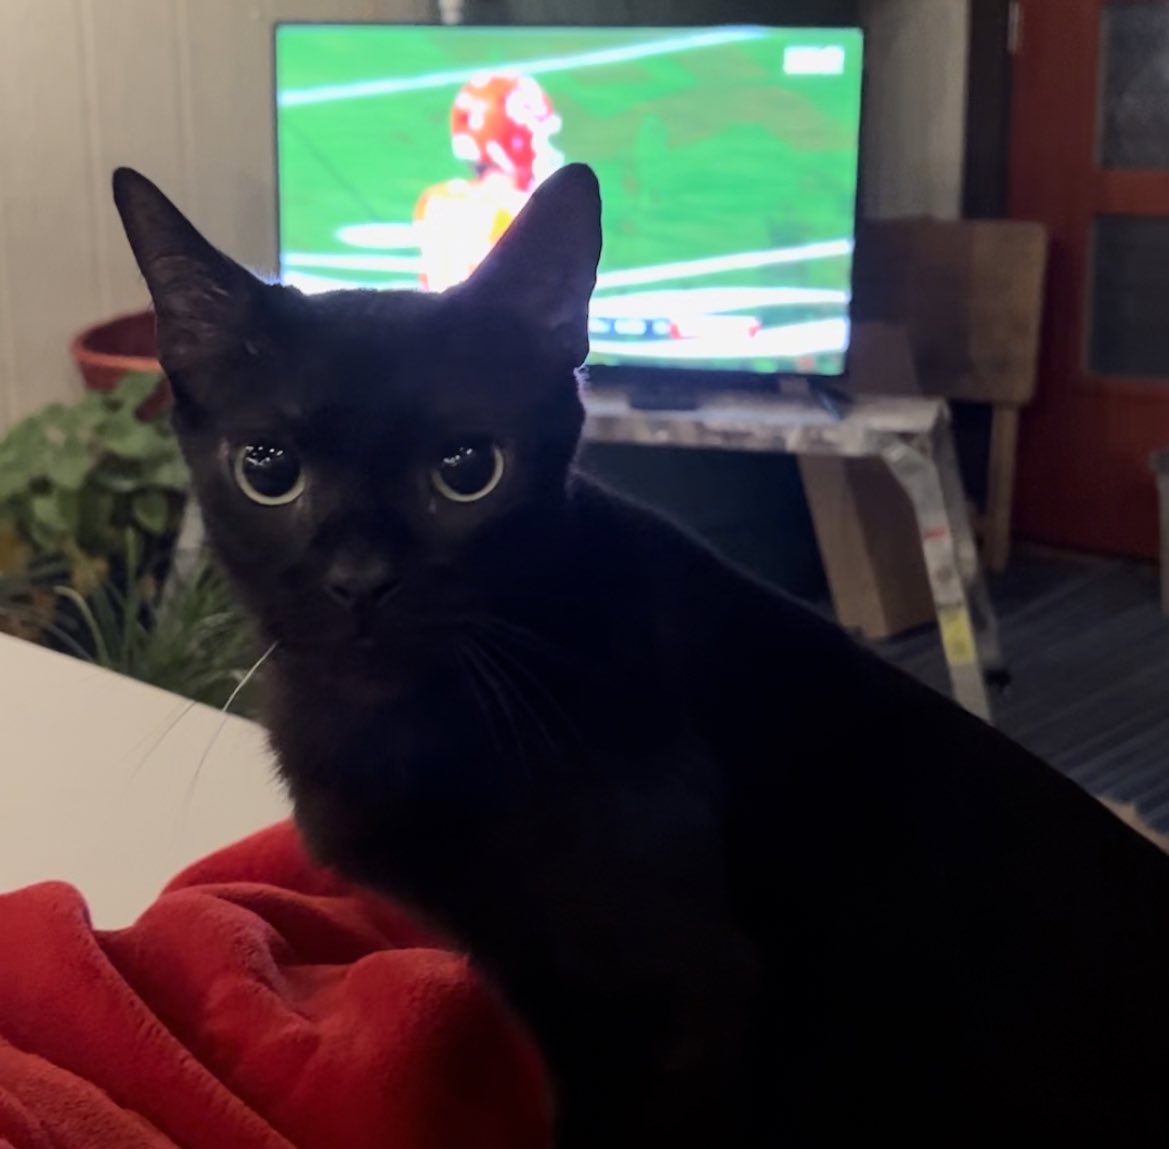 Since the Jaguars didn’t go to the Super Bowl, I decided to make the most of it by watching for Taylor Swift moments during the game. 🏈 I was not disappointed. #SuperBowlSunday #catsoftheday #SuperBowl